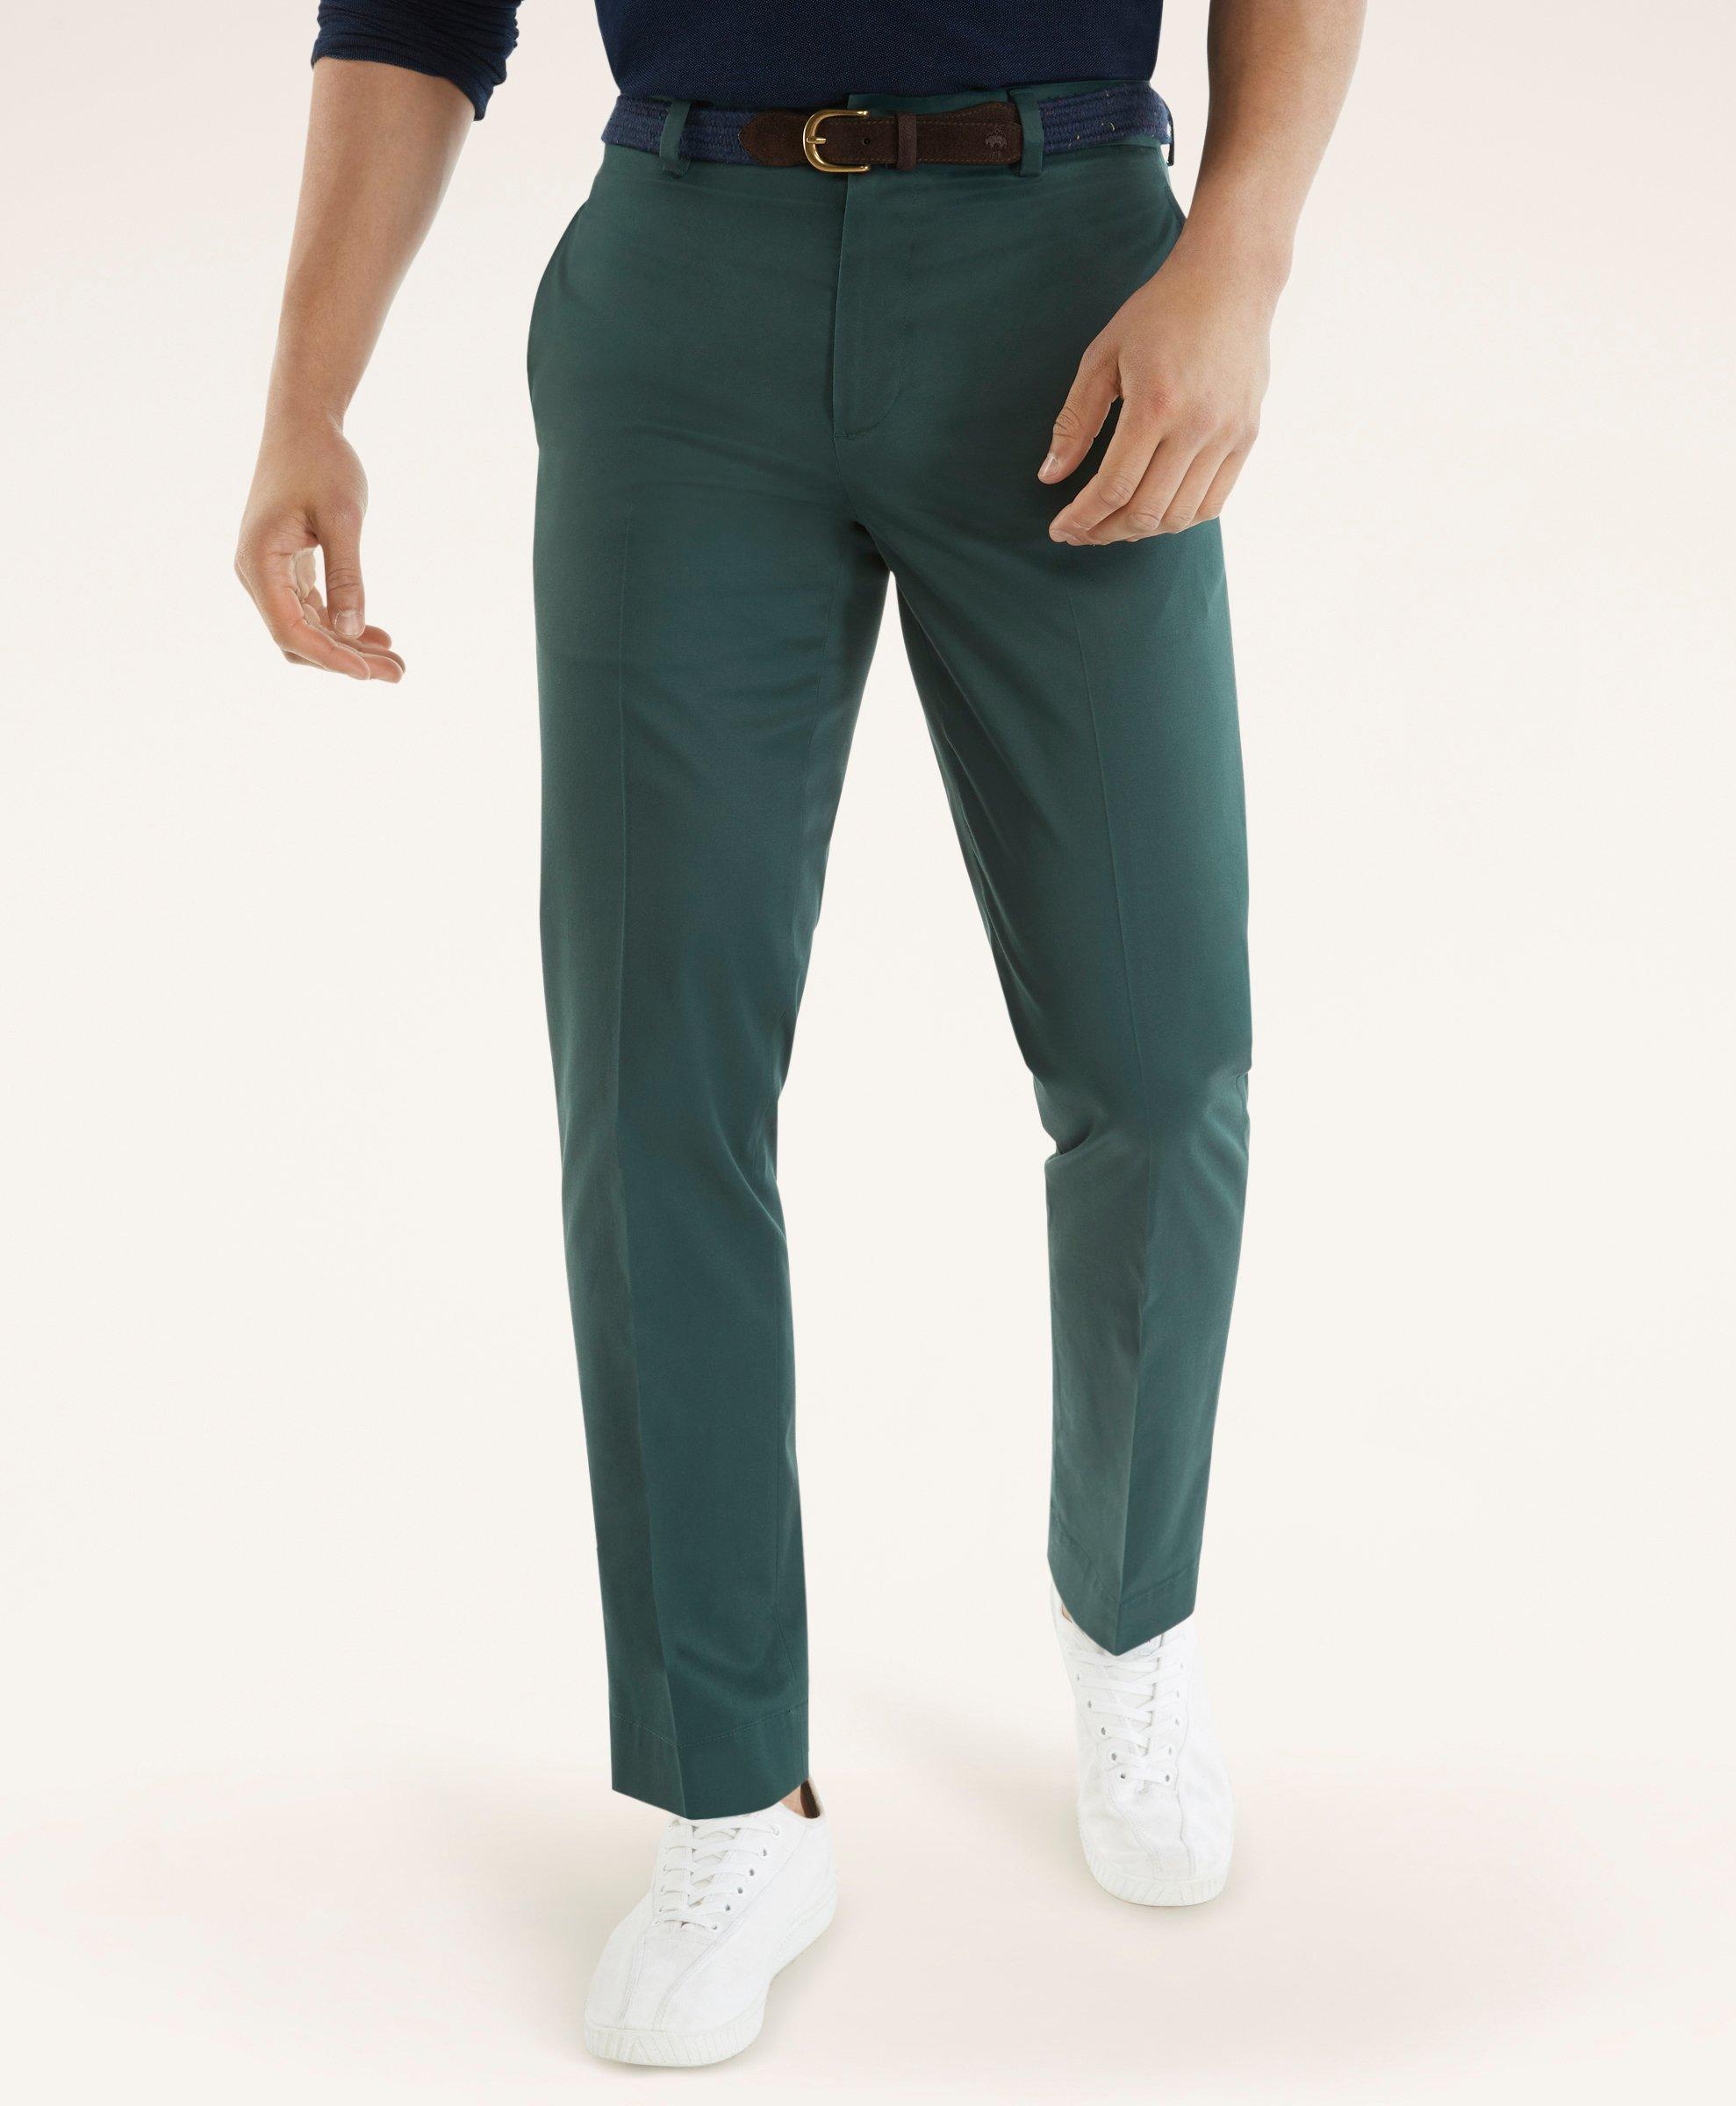 Shop Men's Chinos & Casual Pants on Sale